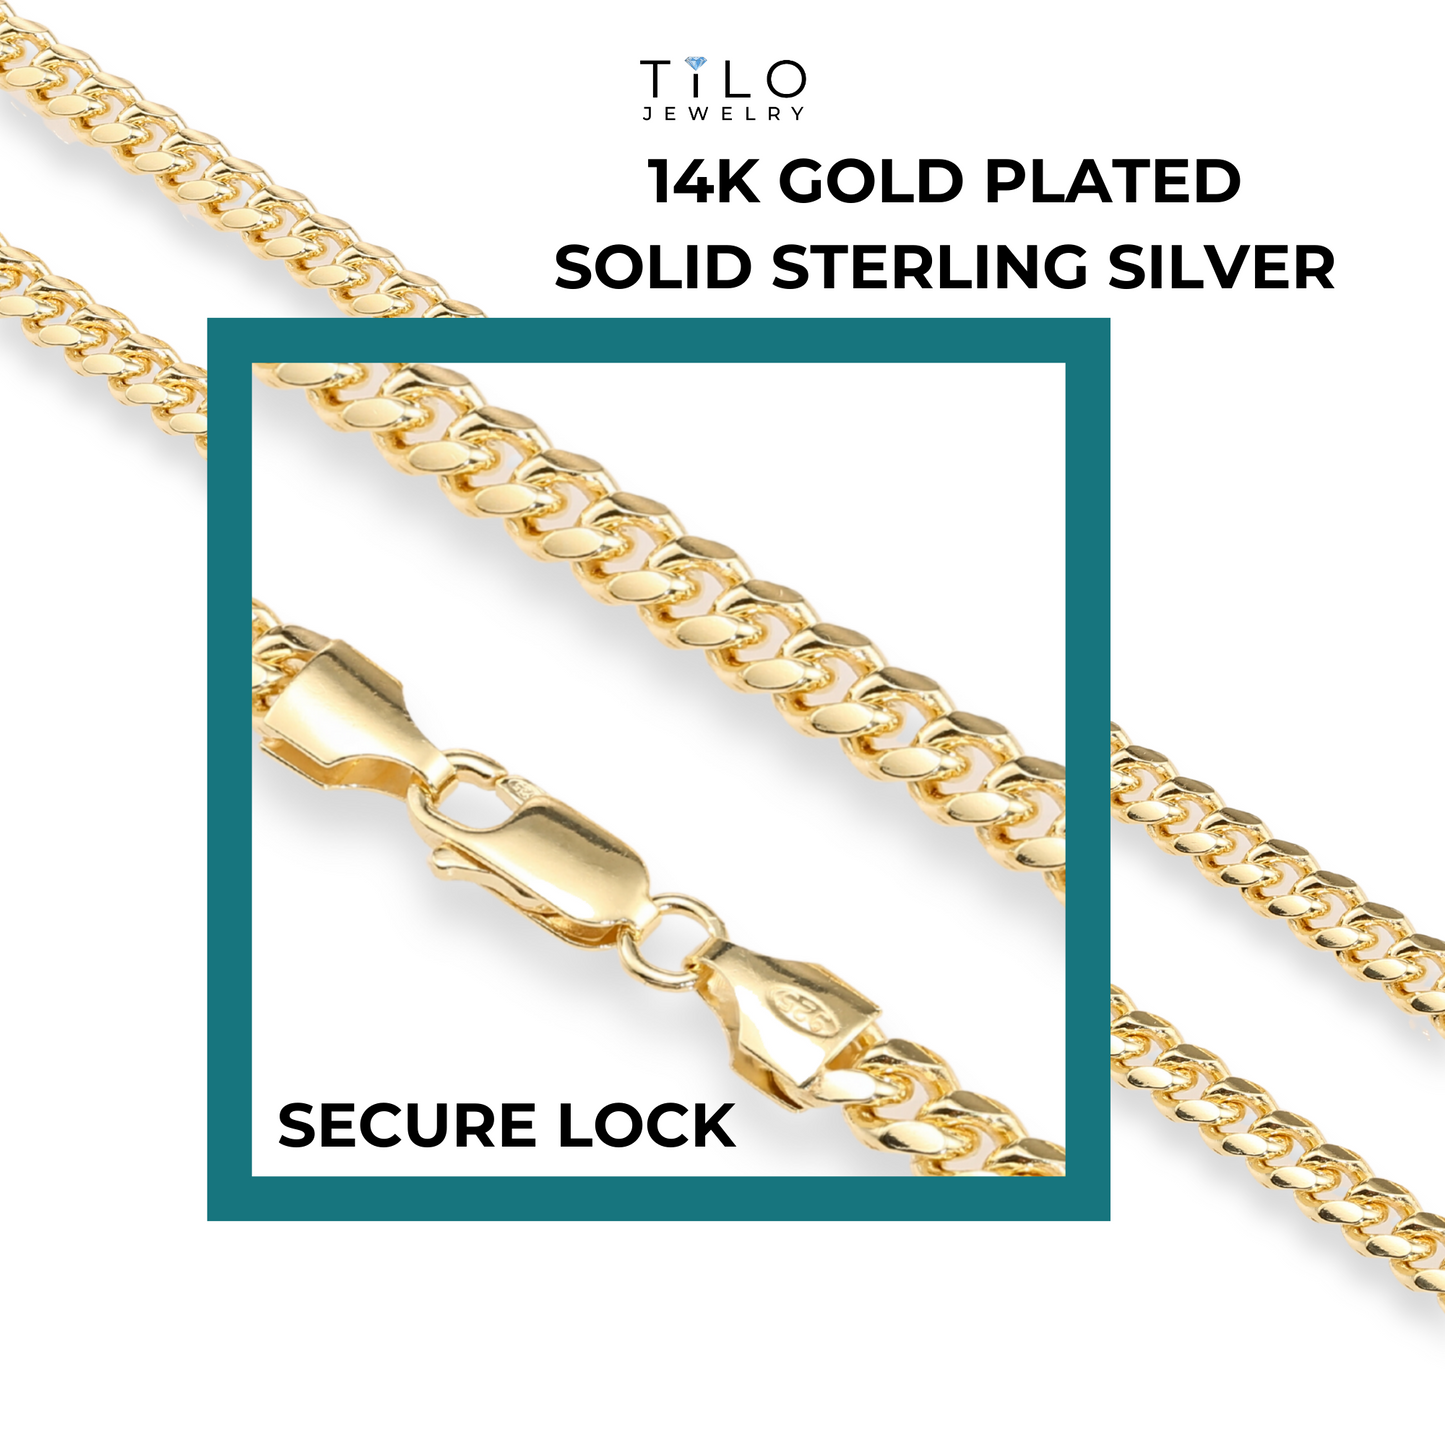 14k Gold Plated 5mm Cuban Chains, Italian 925 Solid Sterling Silver, Strong Lobster Lock